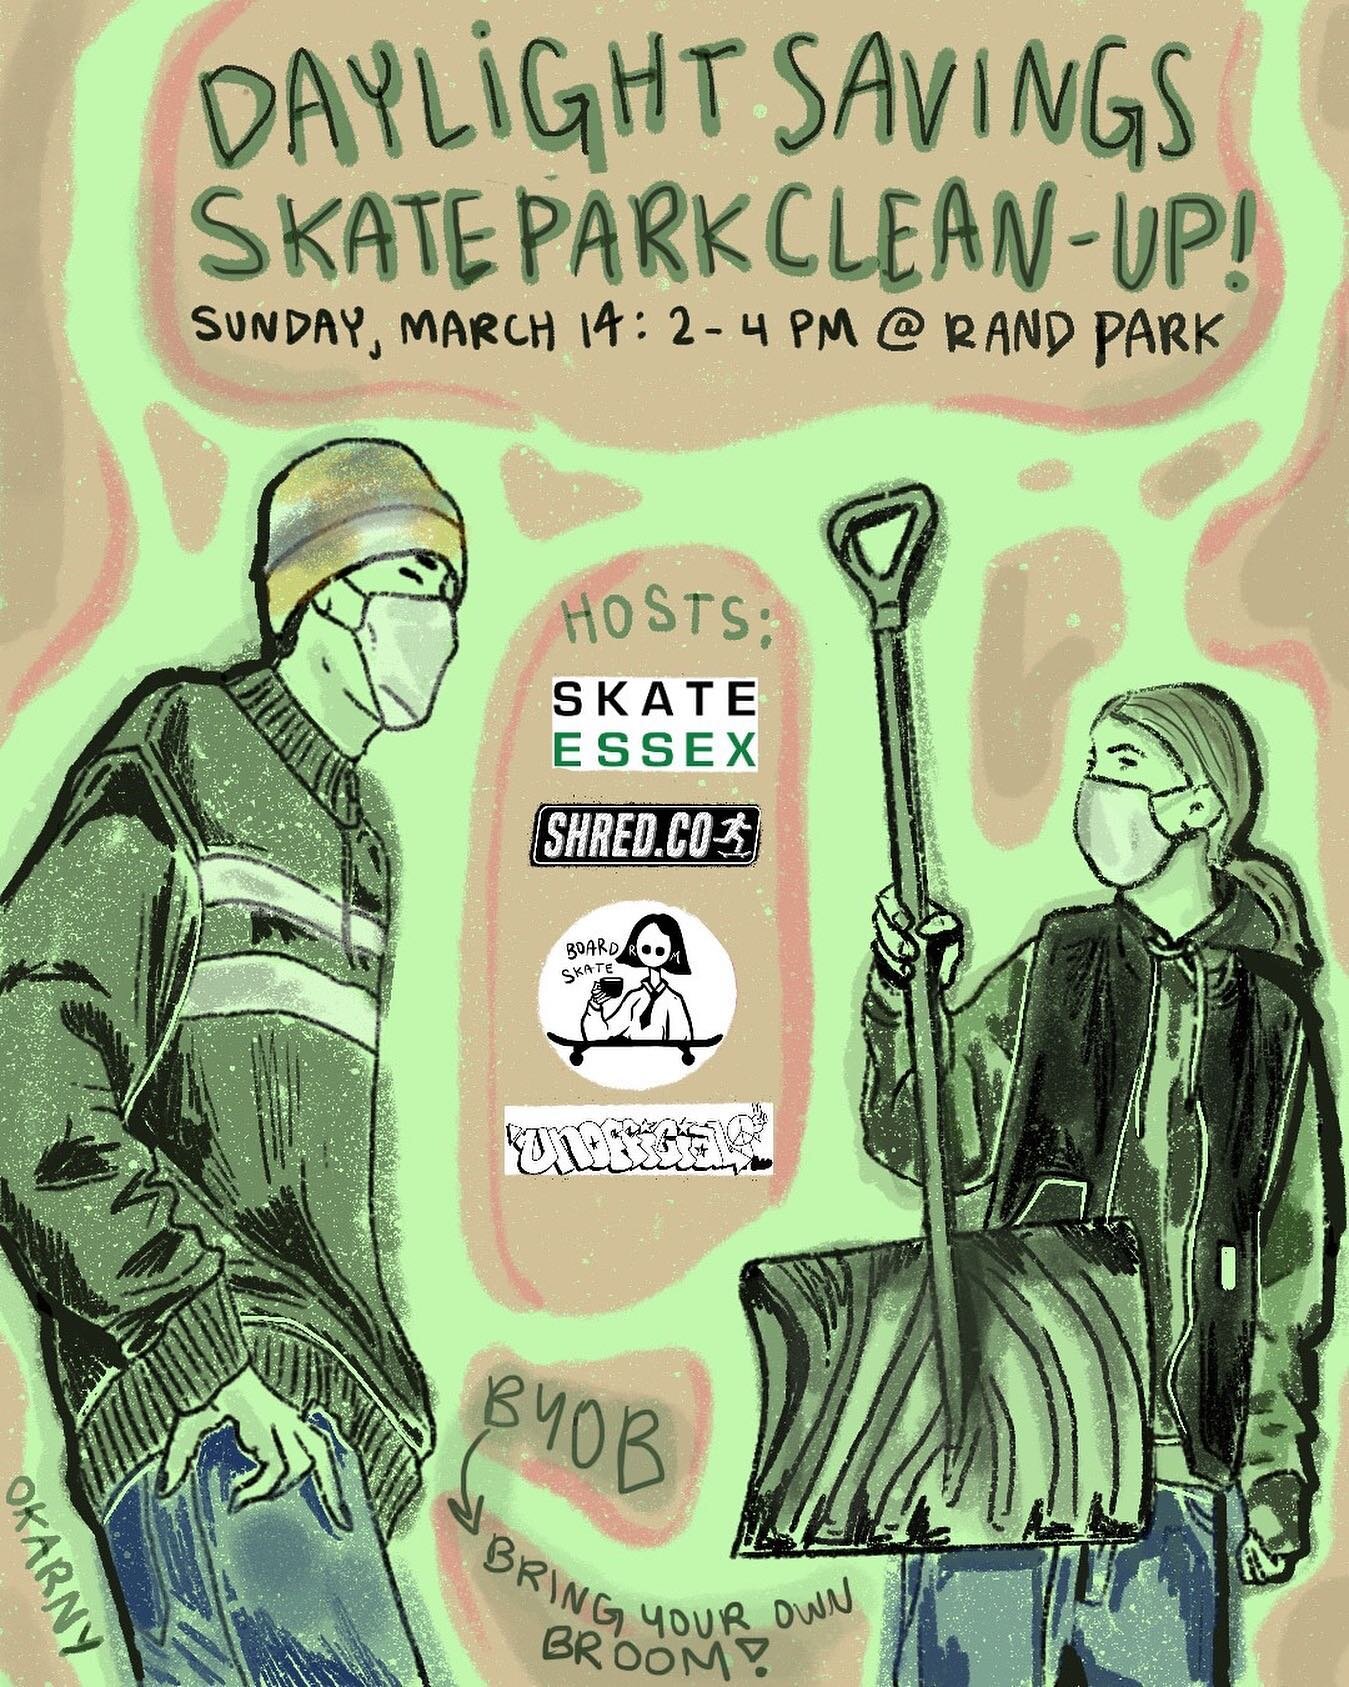 Spring Cleaning Time 😷 DON&rsquo;T FORGET TO WEAR YOUR MASKS 😷 @courtskatepark Montclair, NJ *volunteers welcome.  Bring your own brooms. Thanks to our partners @shred.co @unofficial.skate @mhs_skateclub @boardroomskate for coming together to make 